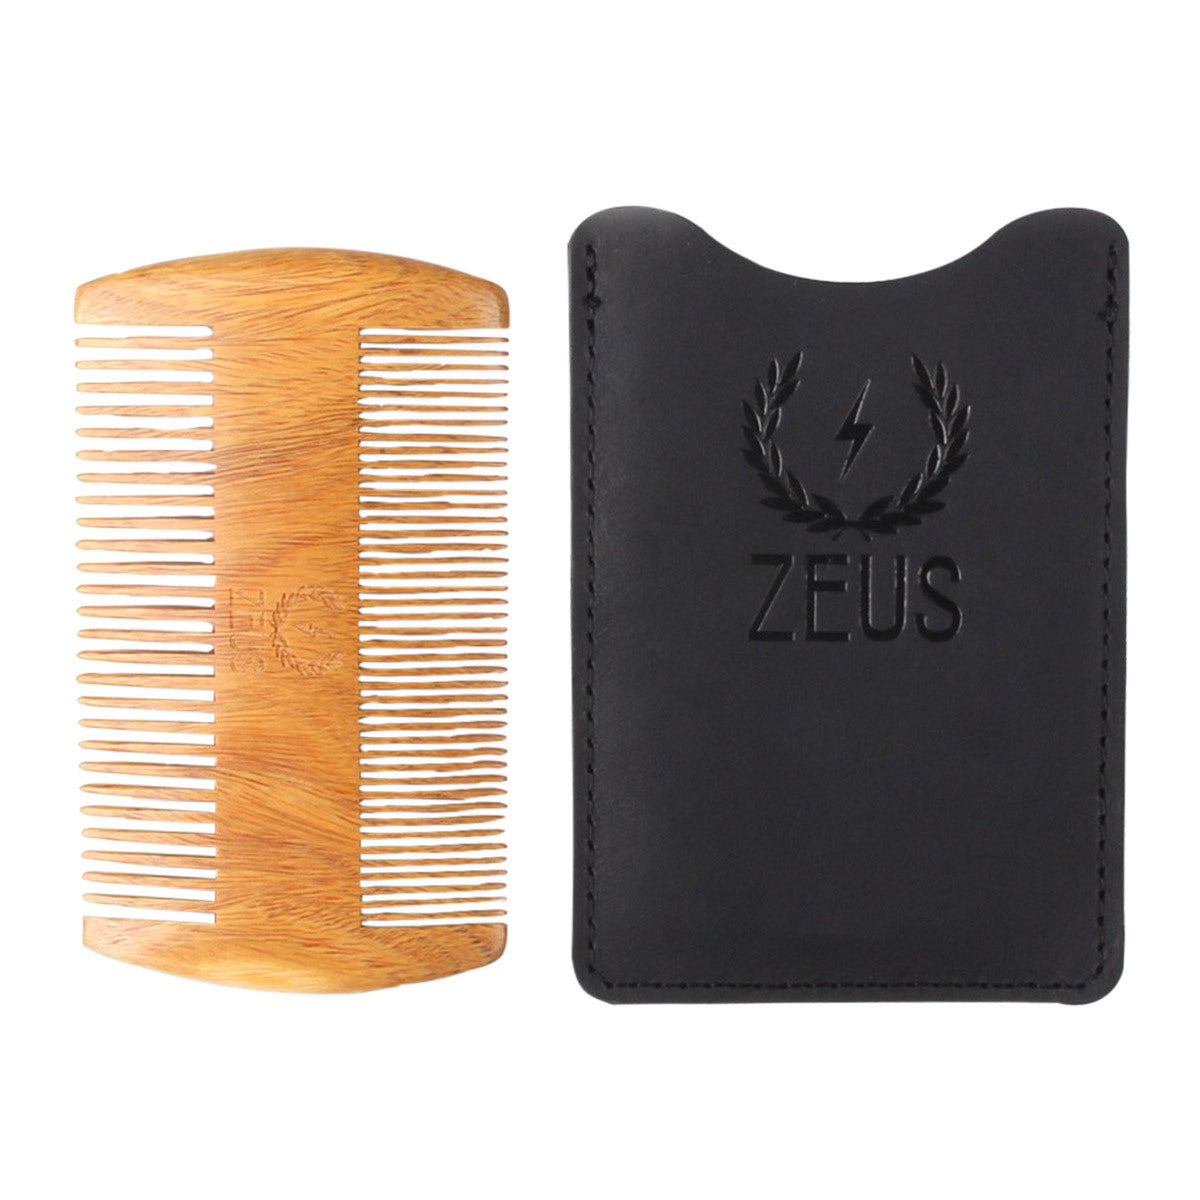 Primary image of Zeus Organic Sandalwood Double-Sided Beard Comb with Leather Sheath 4 inches Comb